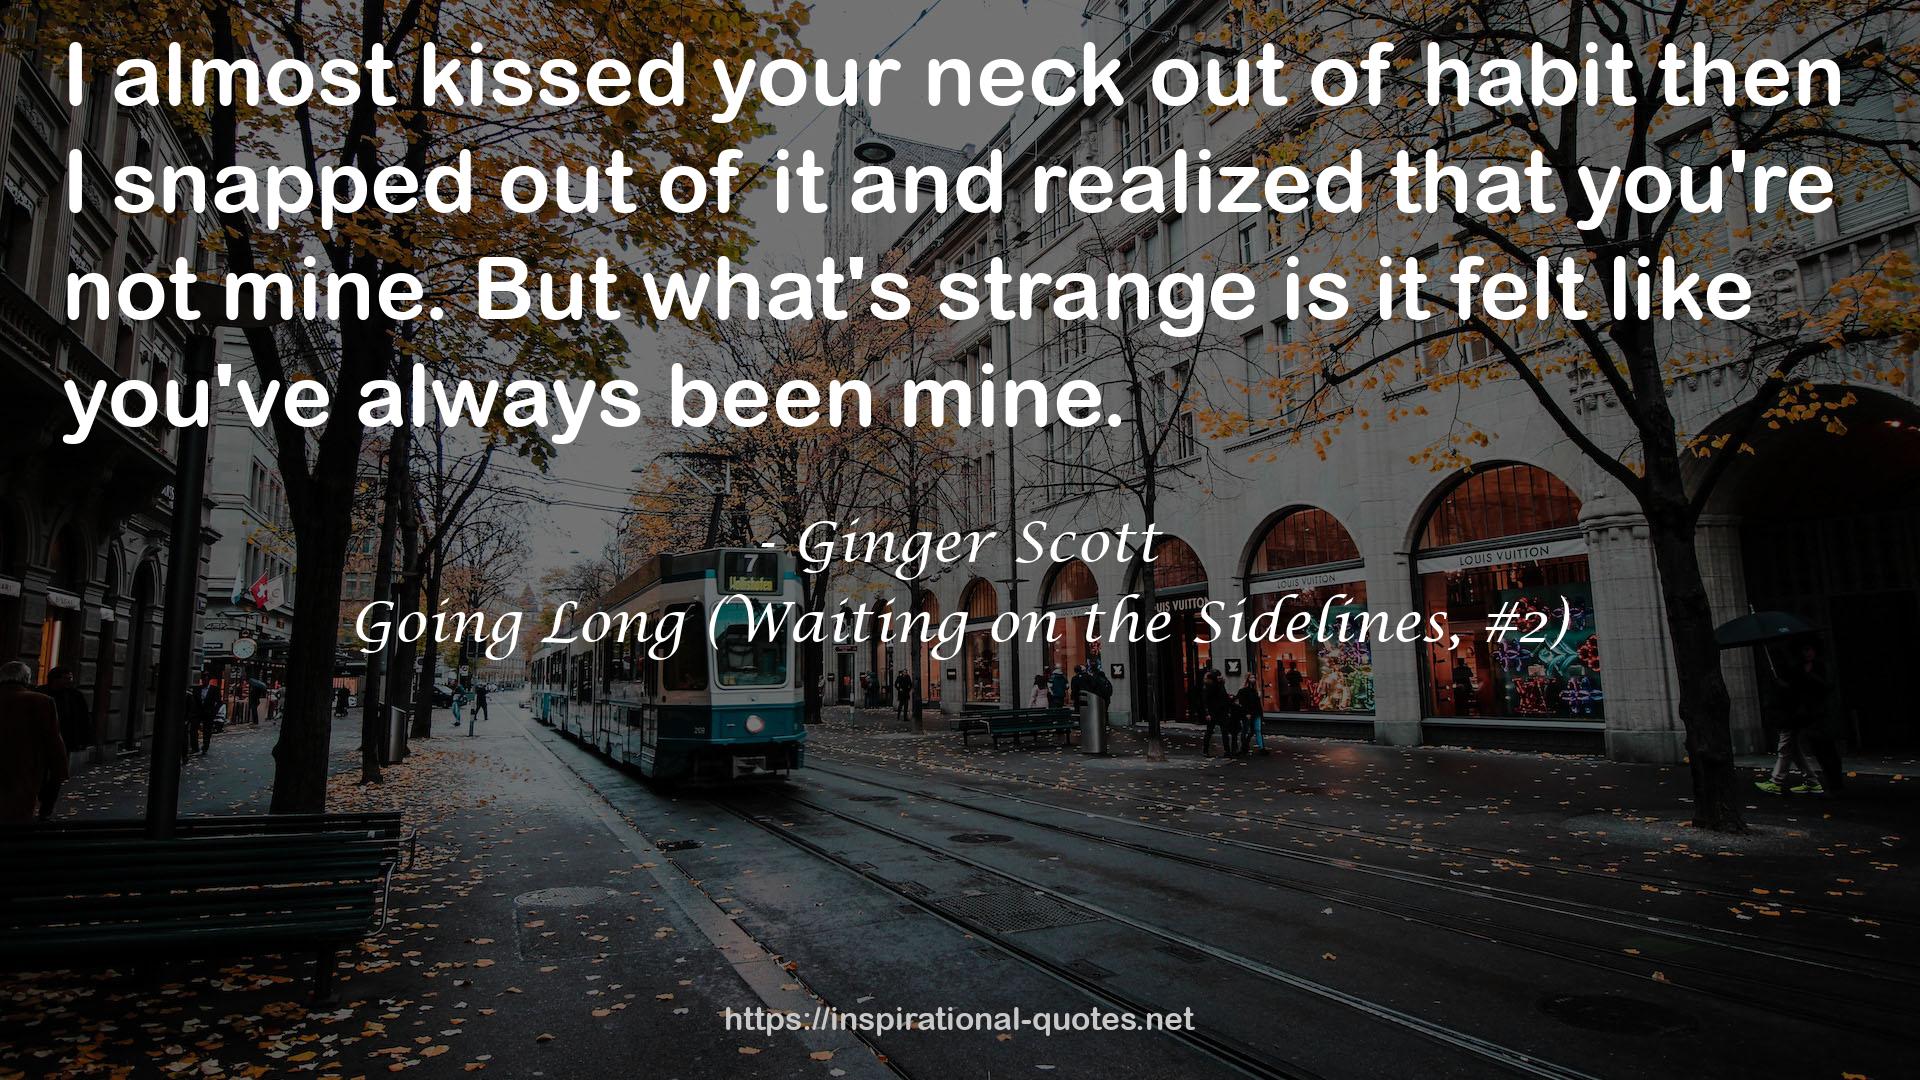 Going Long (Waiting on the Sidelines, #2) QUOTES